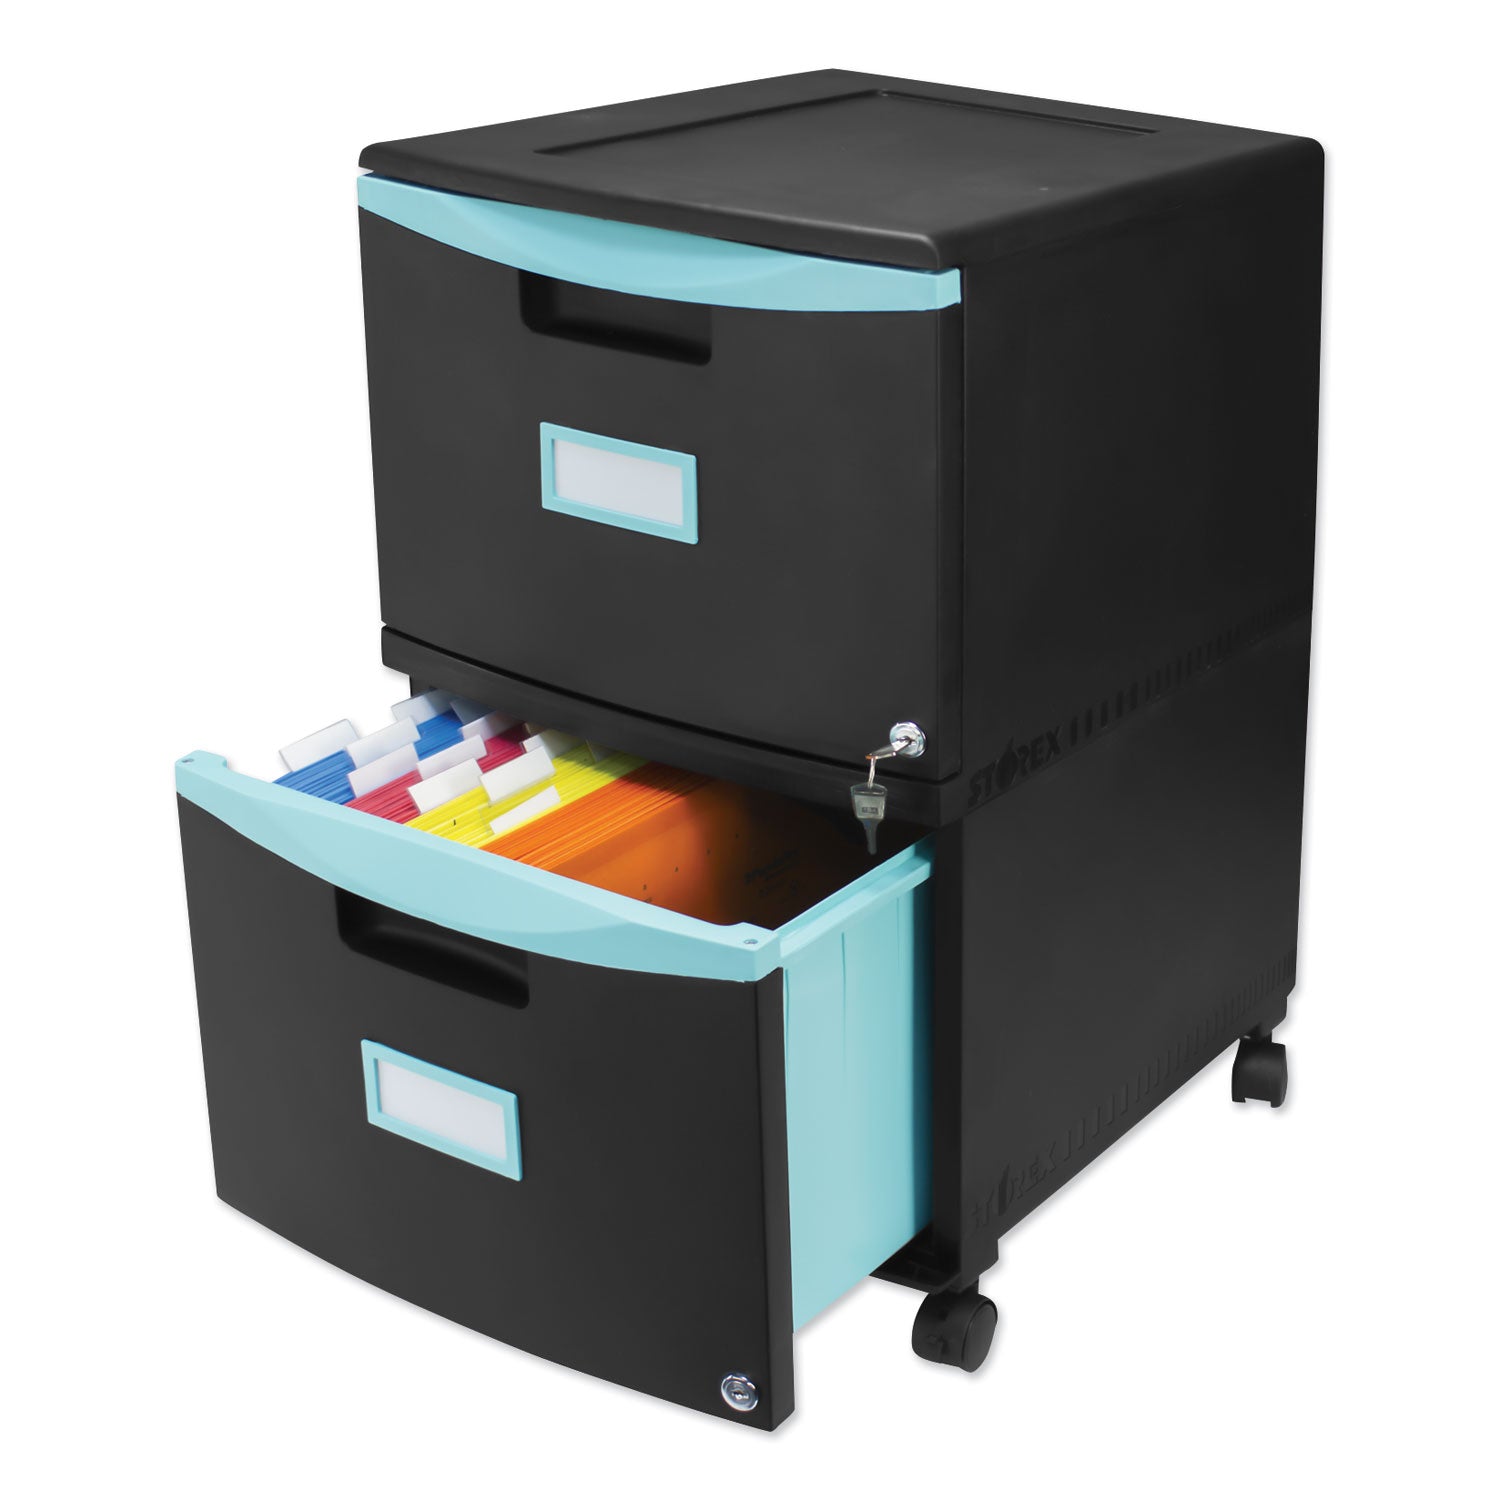 two-drawer-mobile-filing-cabinet-2-legal-letter-size-file-drawers-black-teal-1475-x-1825-x-26_stx61315u01c - 4